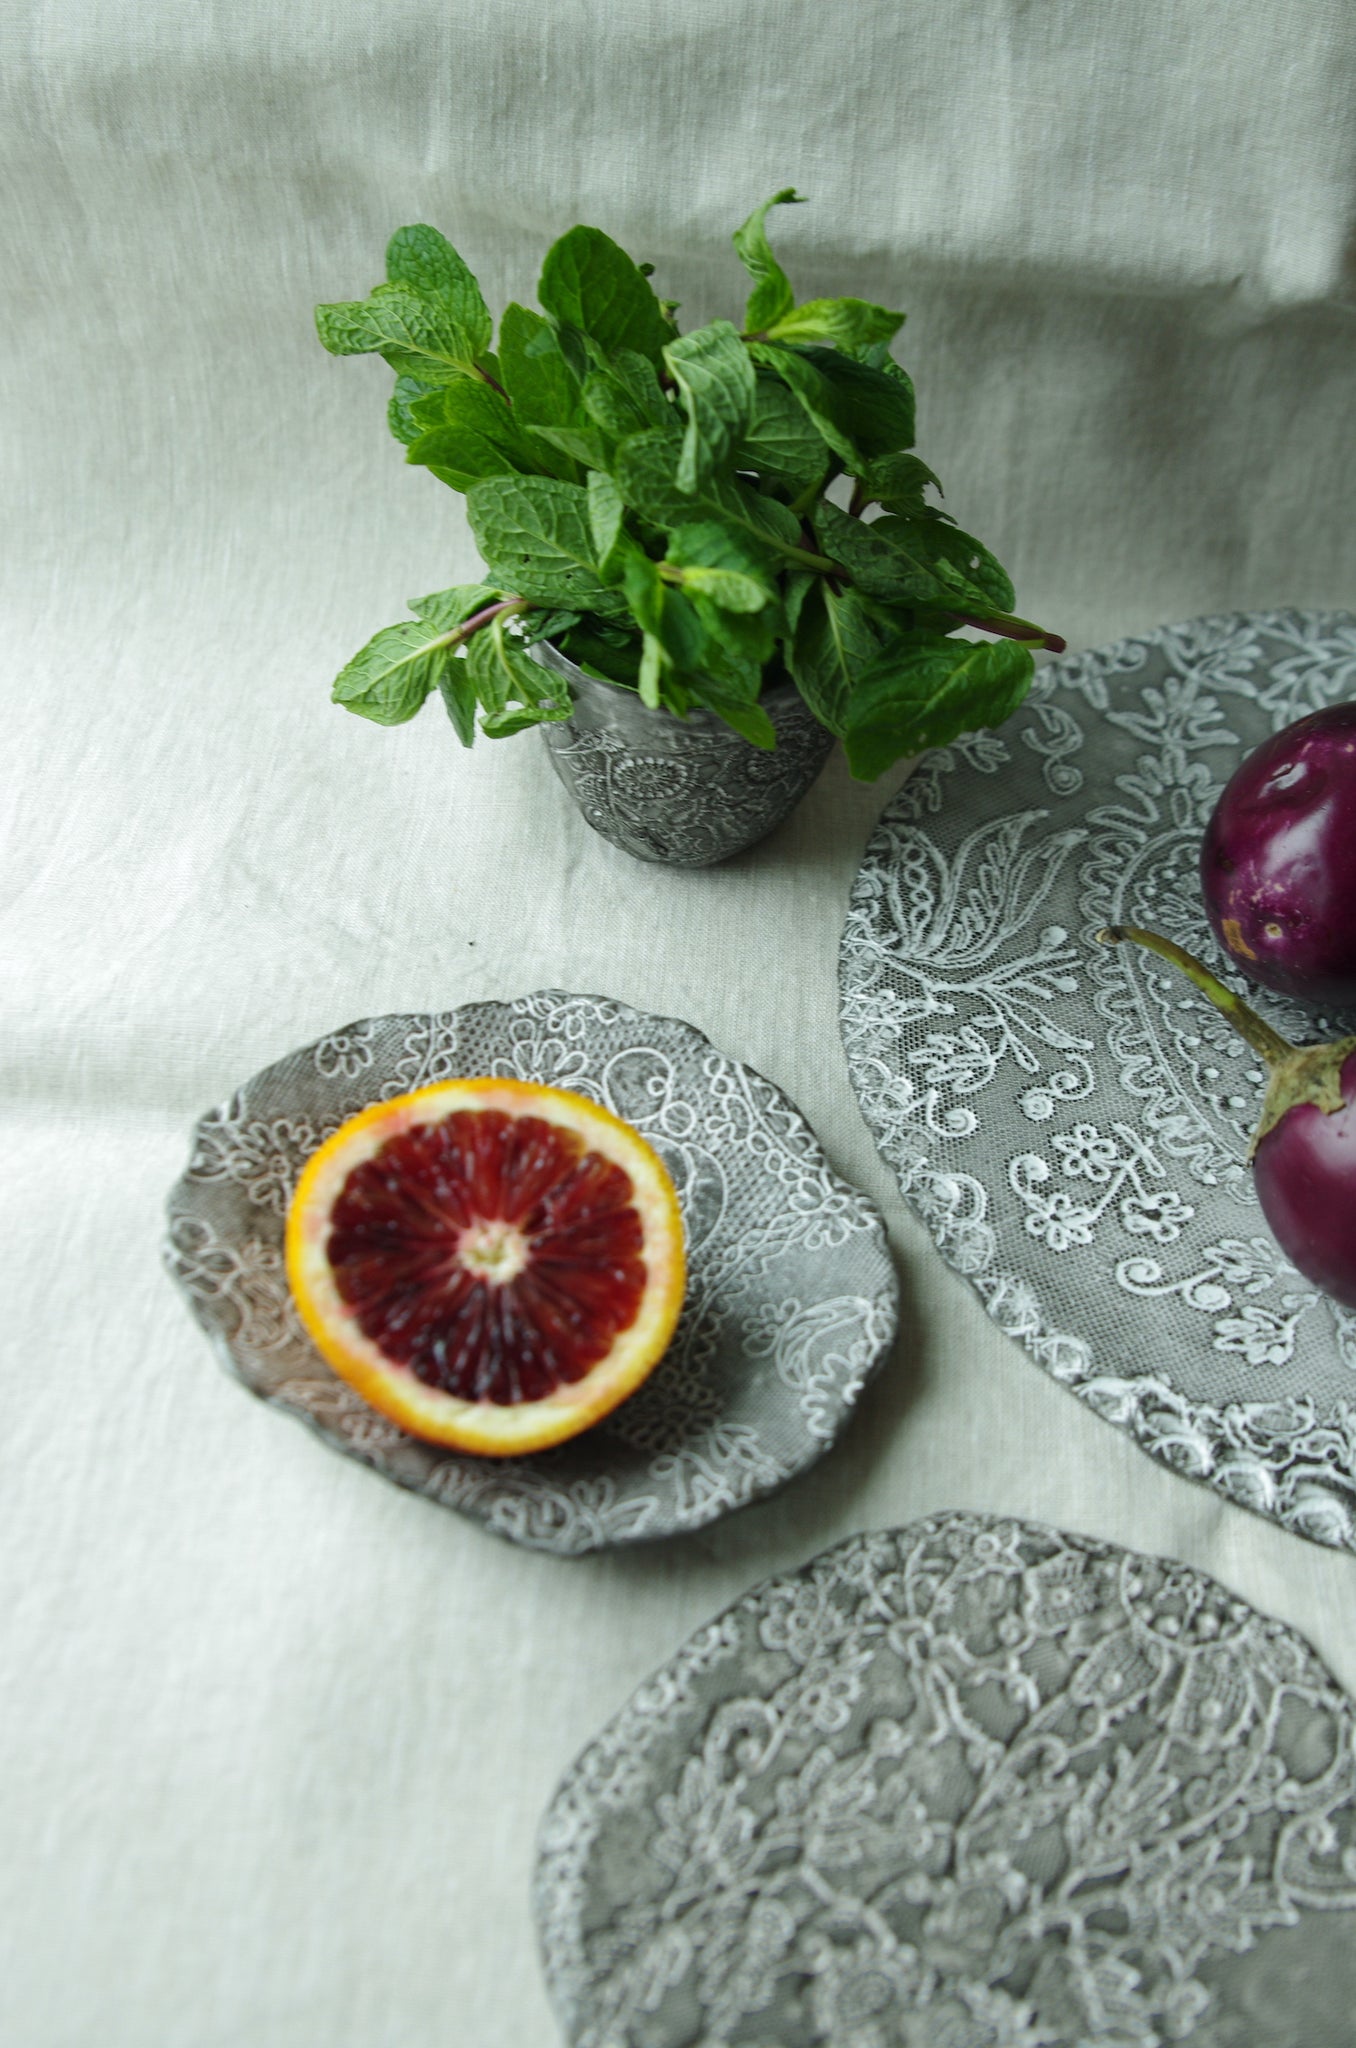 Lace pattern ceramic tableware serving fruits and herbs